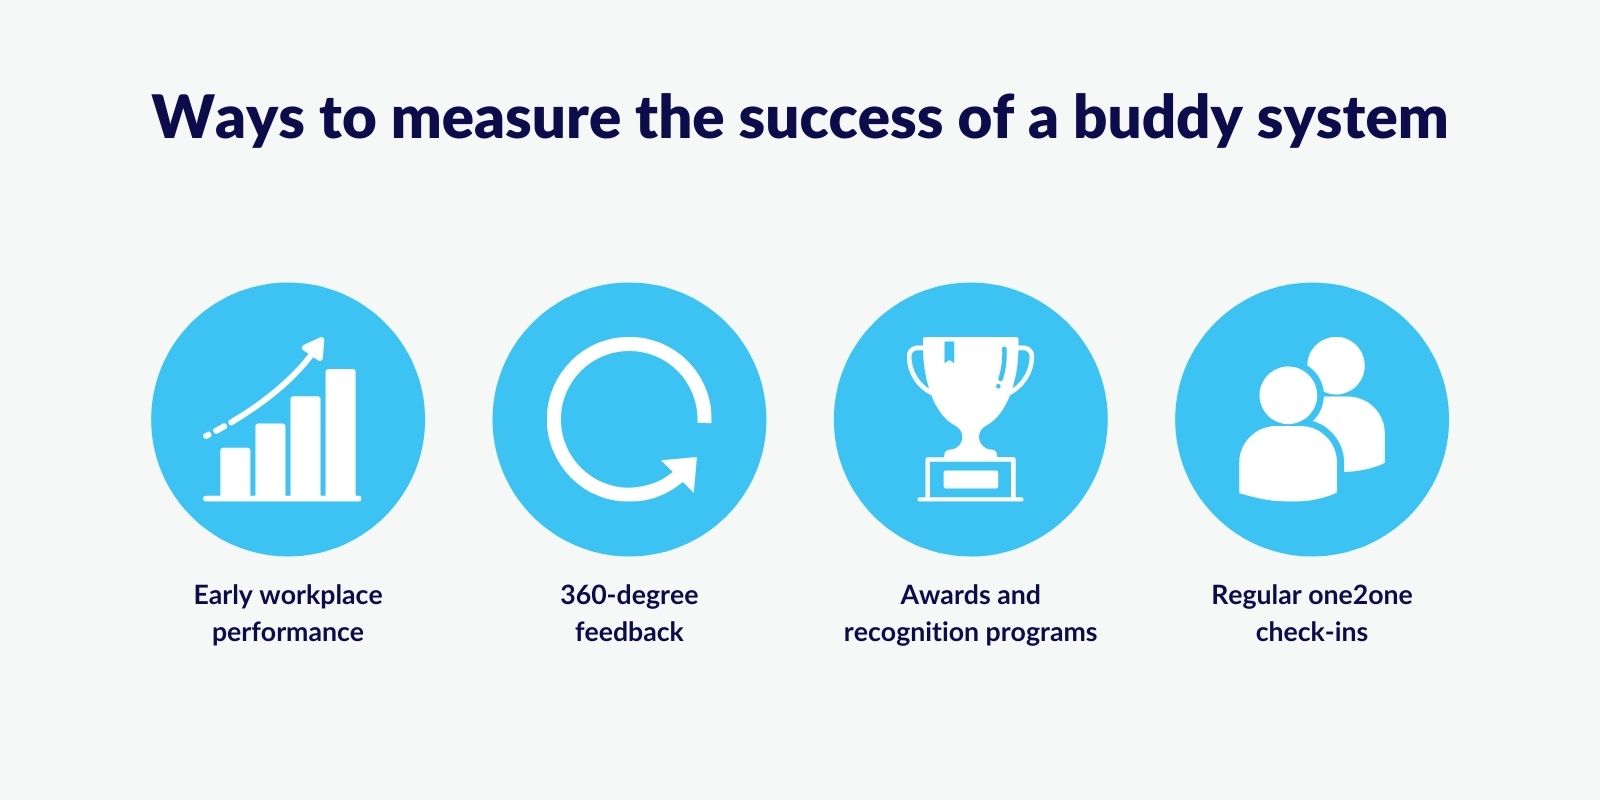 Ways to measure the success of a buddy system